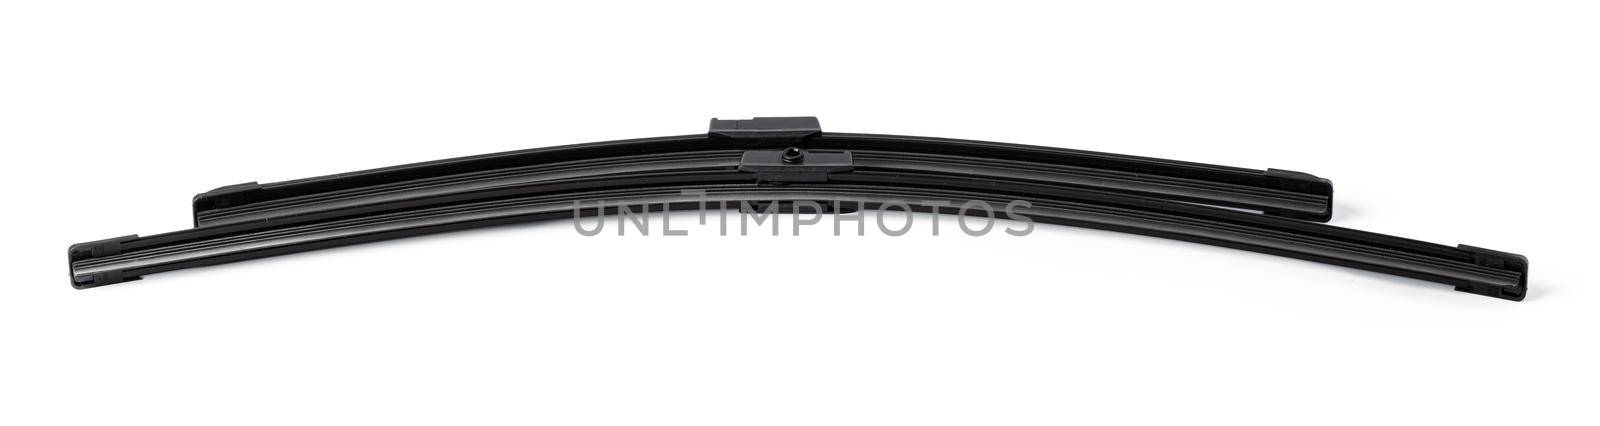 Windshield wipers for cars on a white background. Car part. by Fabrikasimf